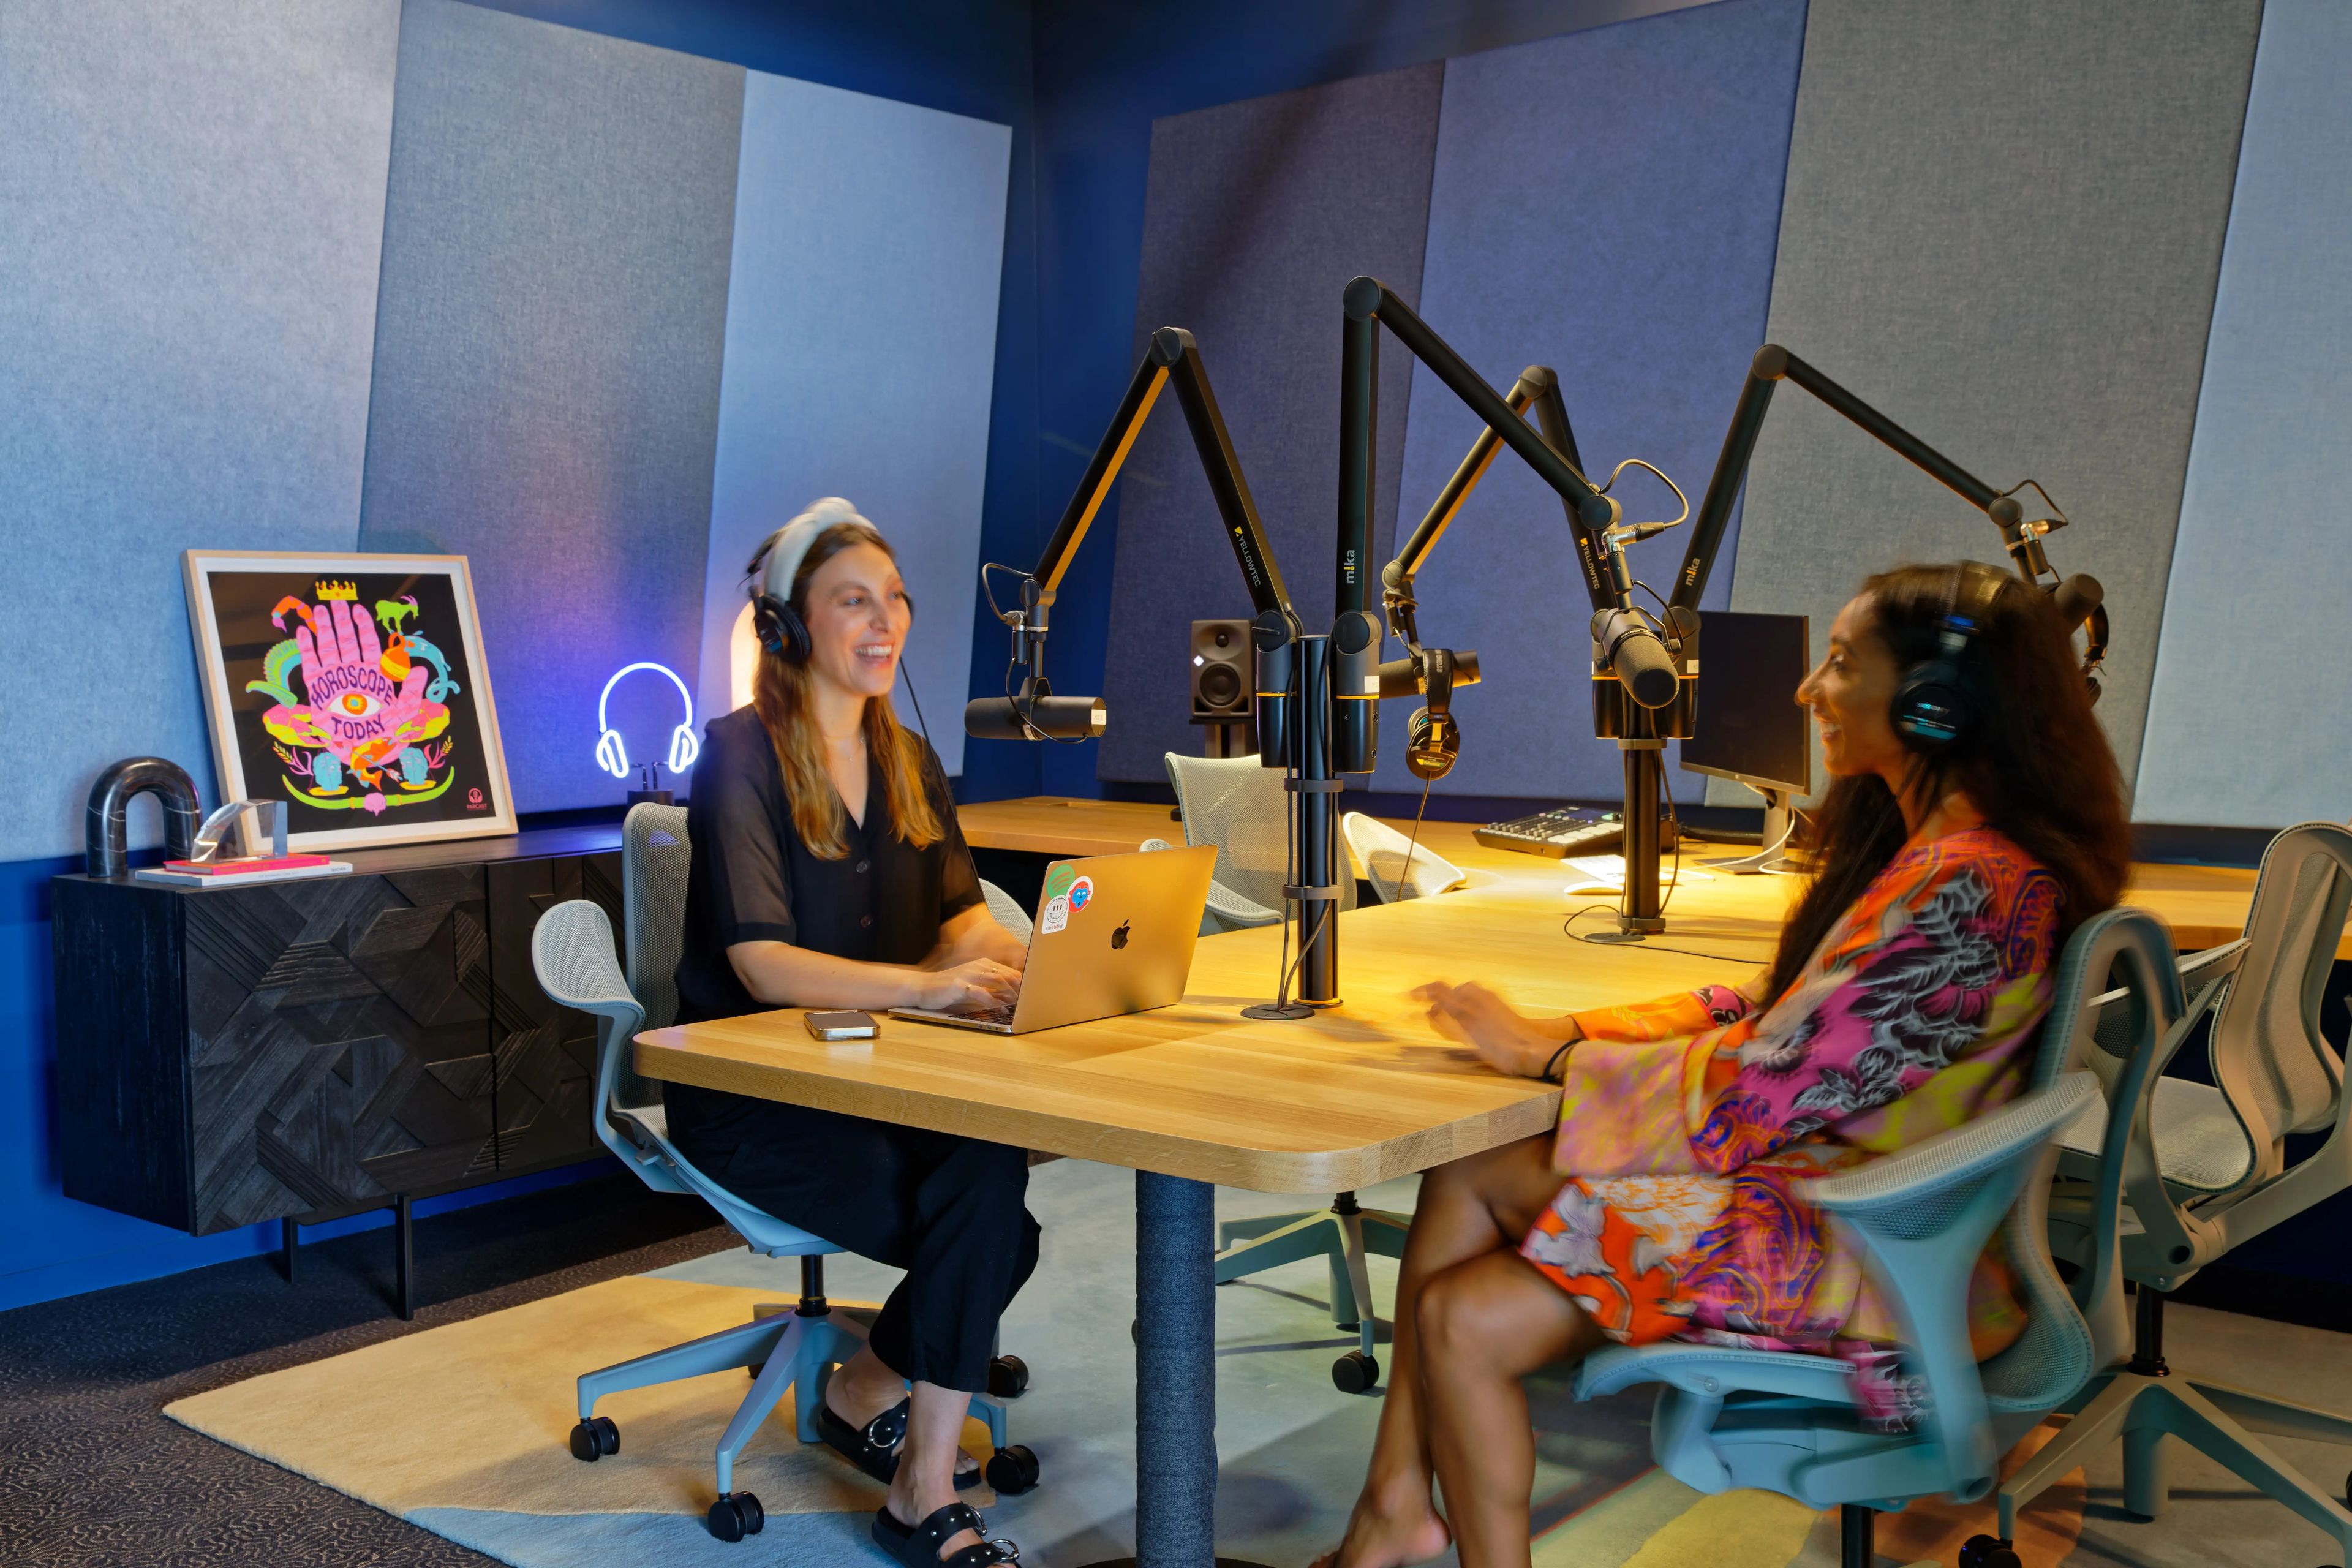 A podcast recording booth with two women seen chatting with headphones on